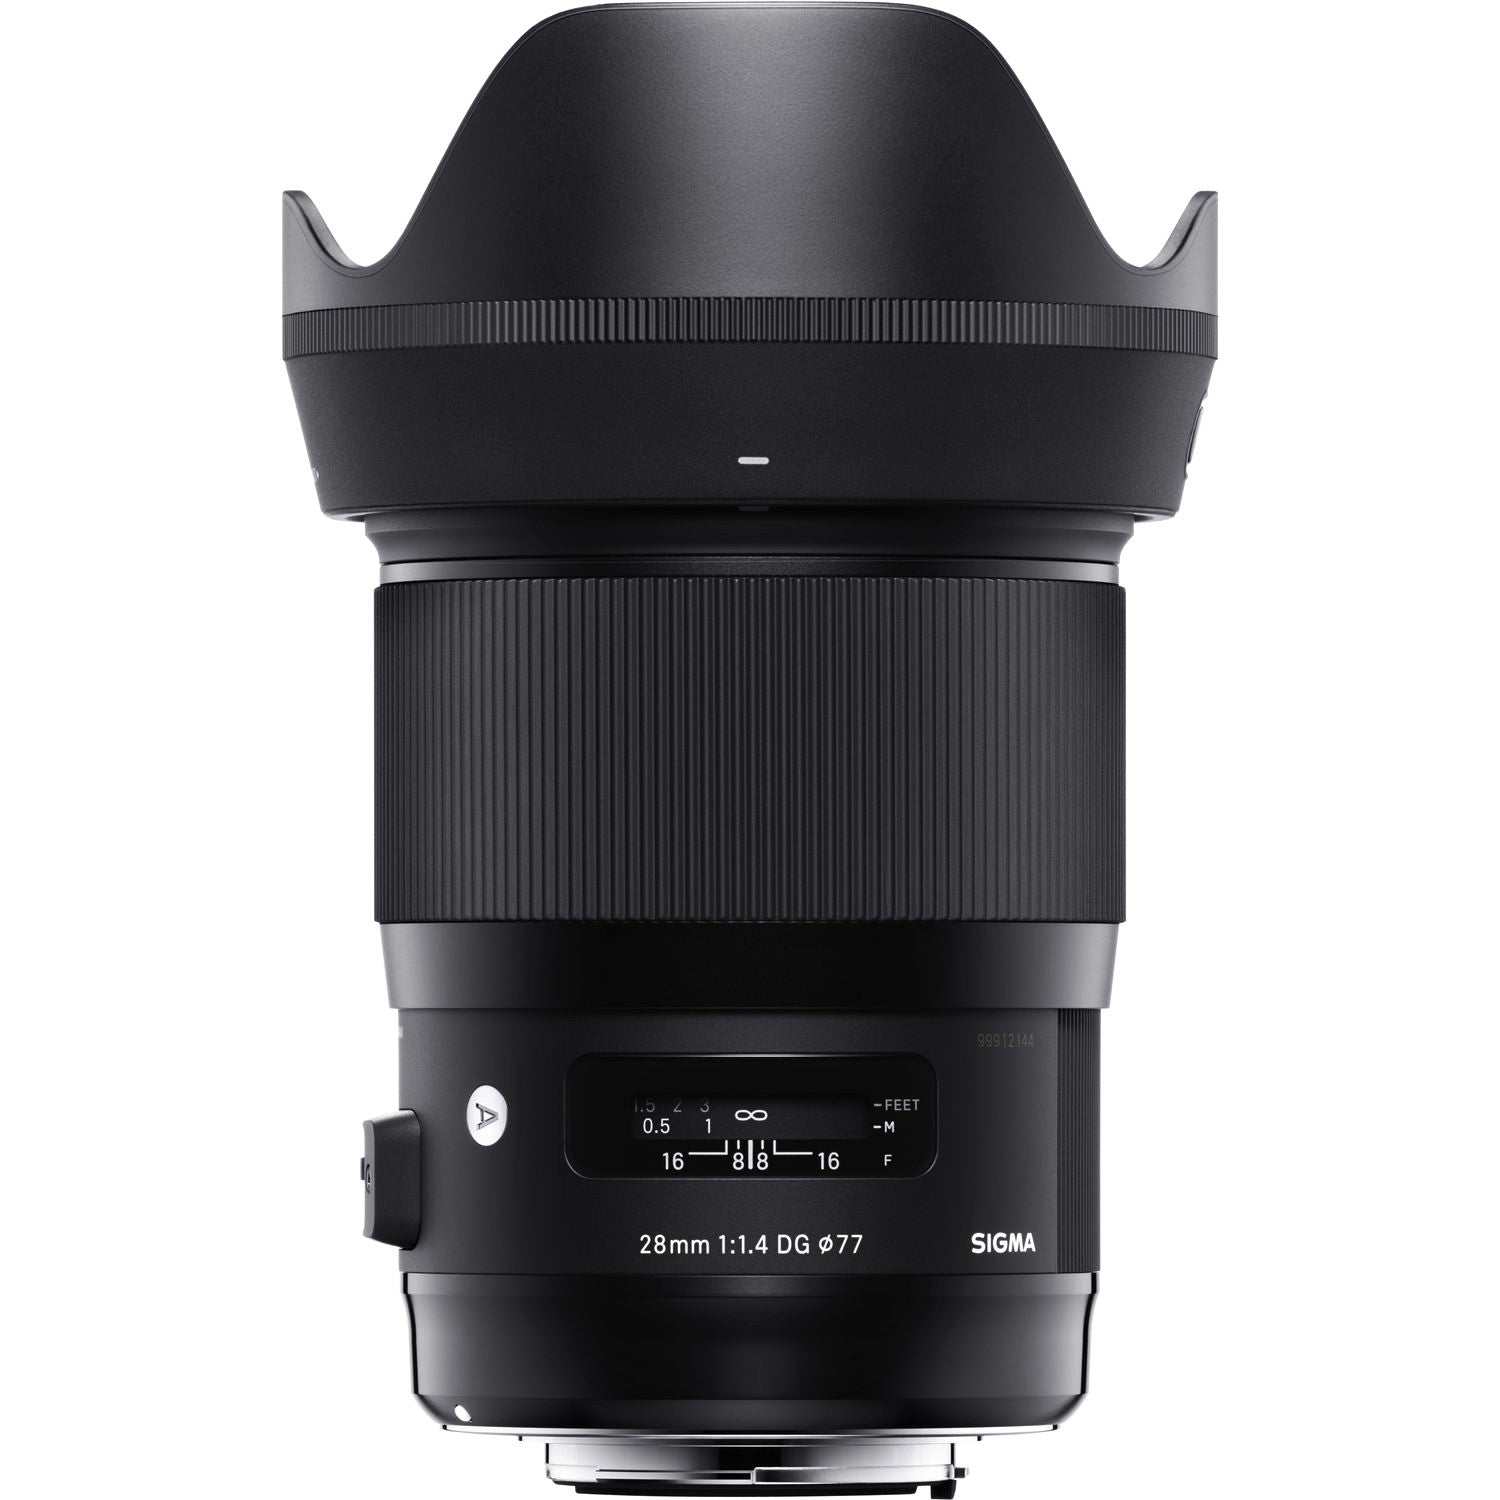 Sigma 28mm F1.4 DG HSM Art Lens for Canon EF with Attached Lens Hood on the Top